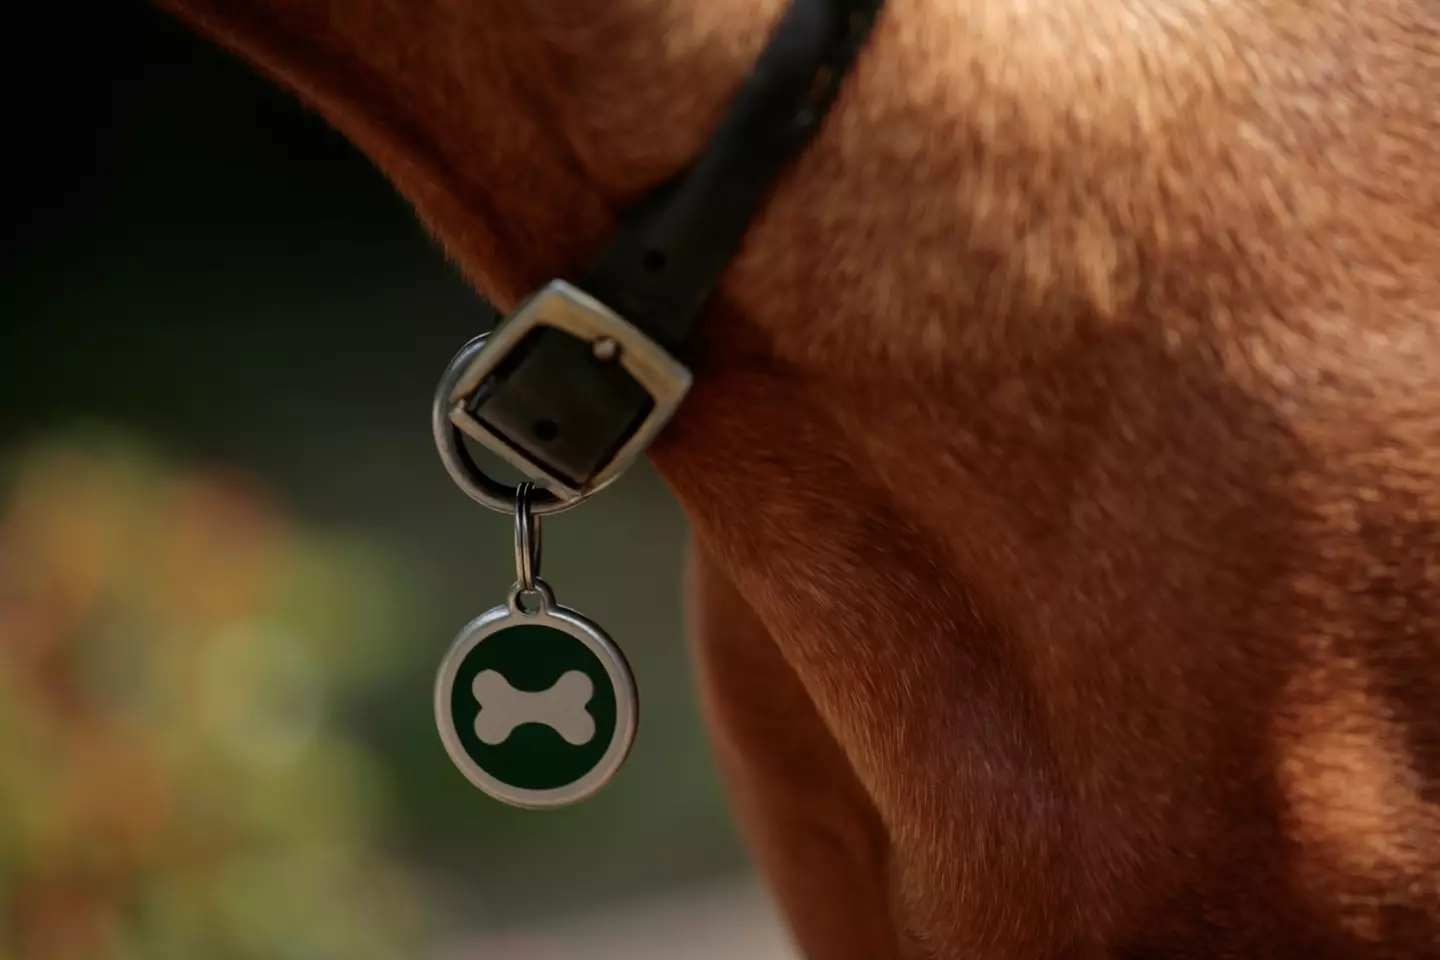 Dog owners often include their contact details on their dog's collar.